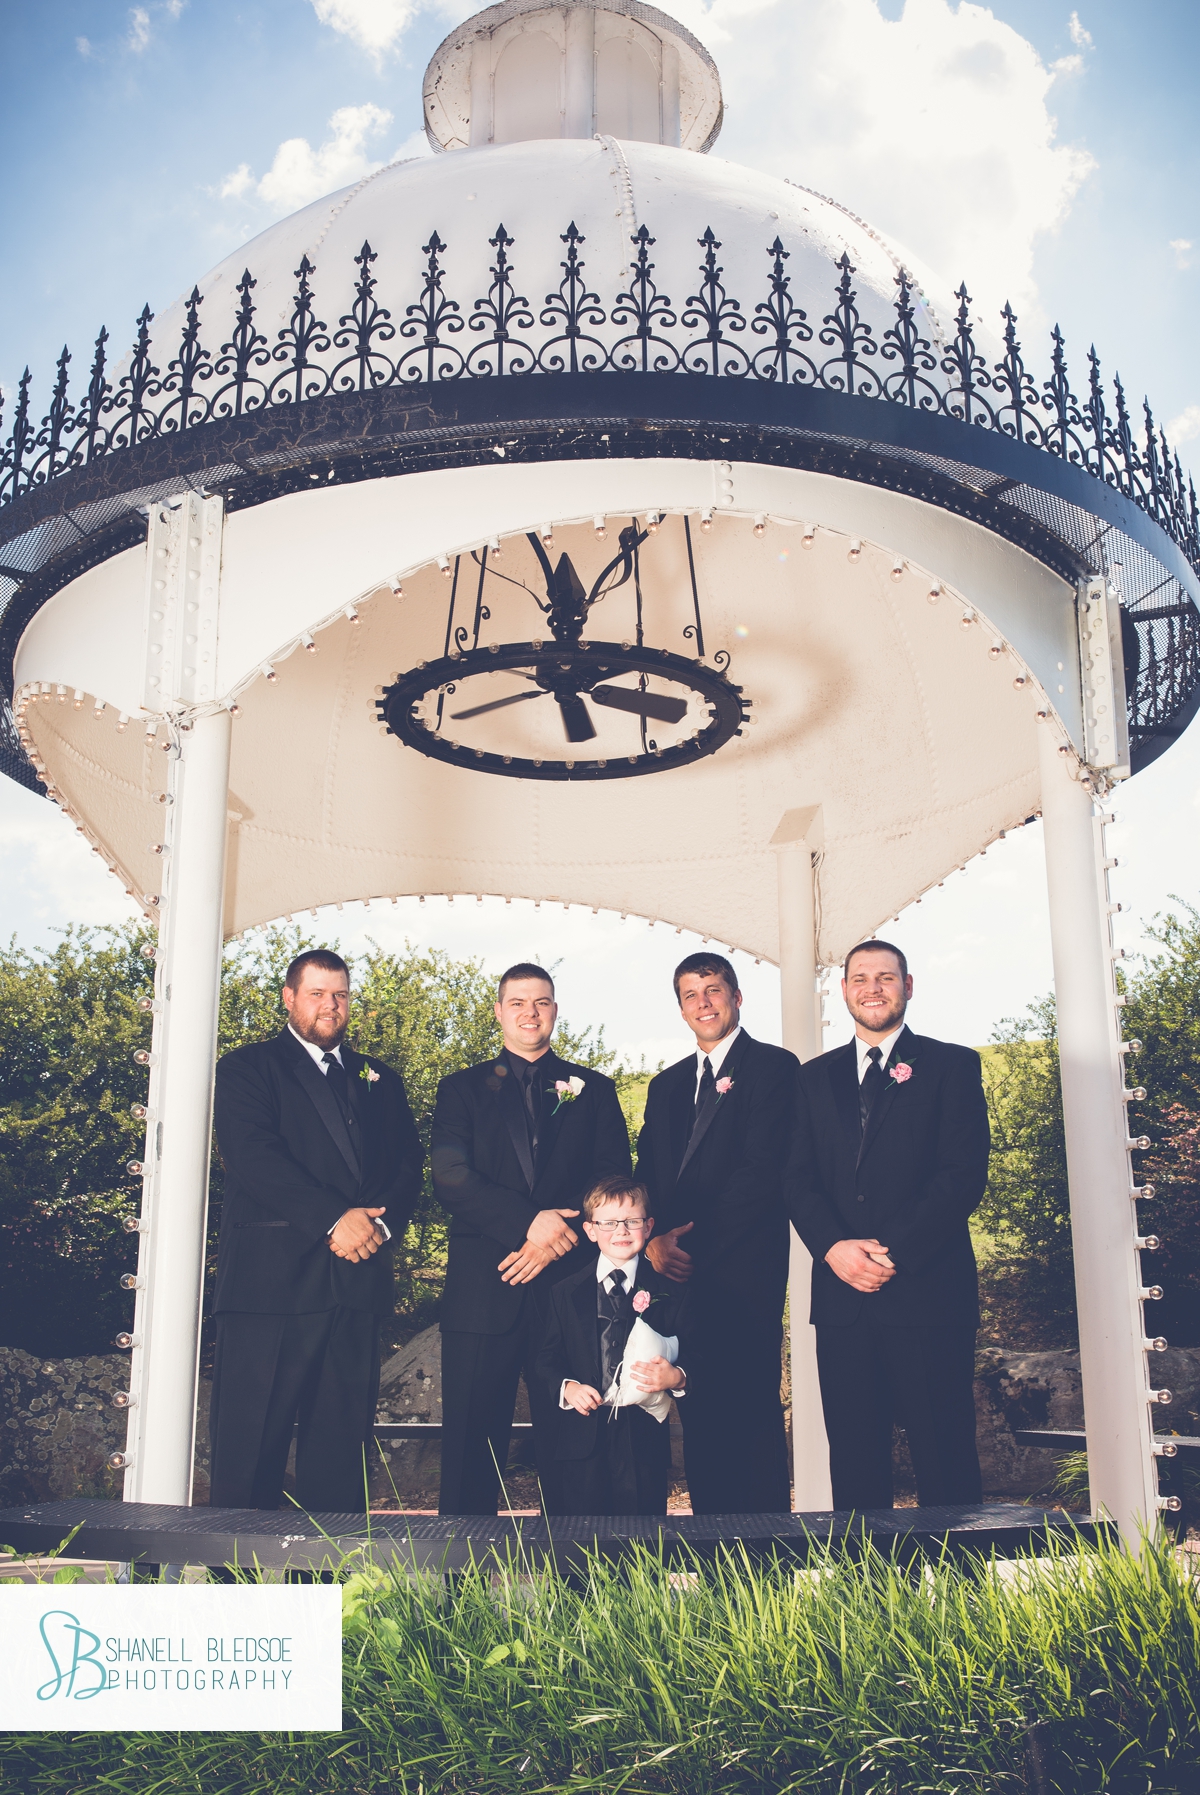 Groom and groomsmen inside gazebo at The Stables in LaFollette, TN